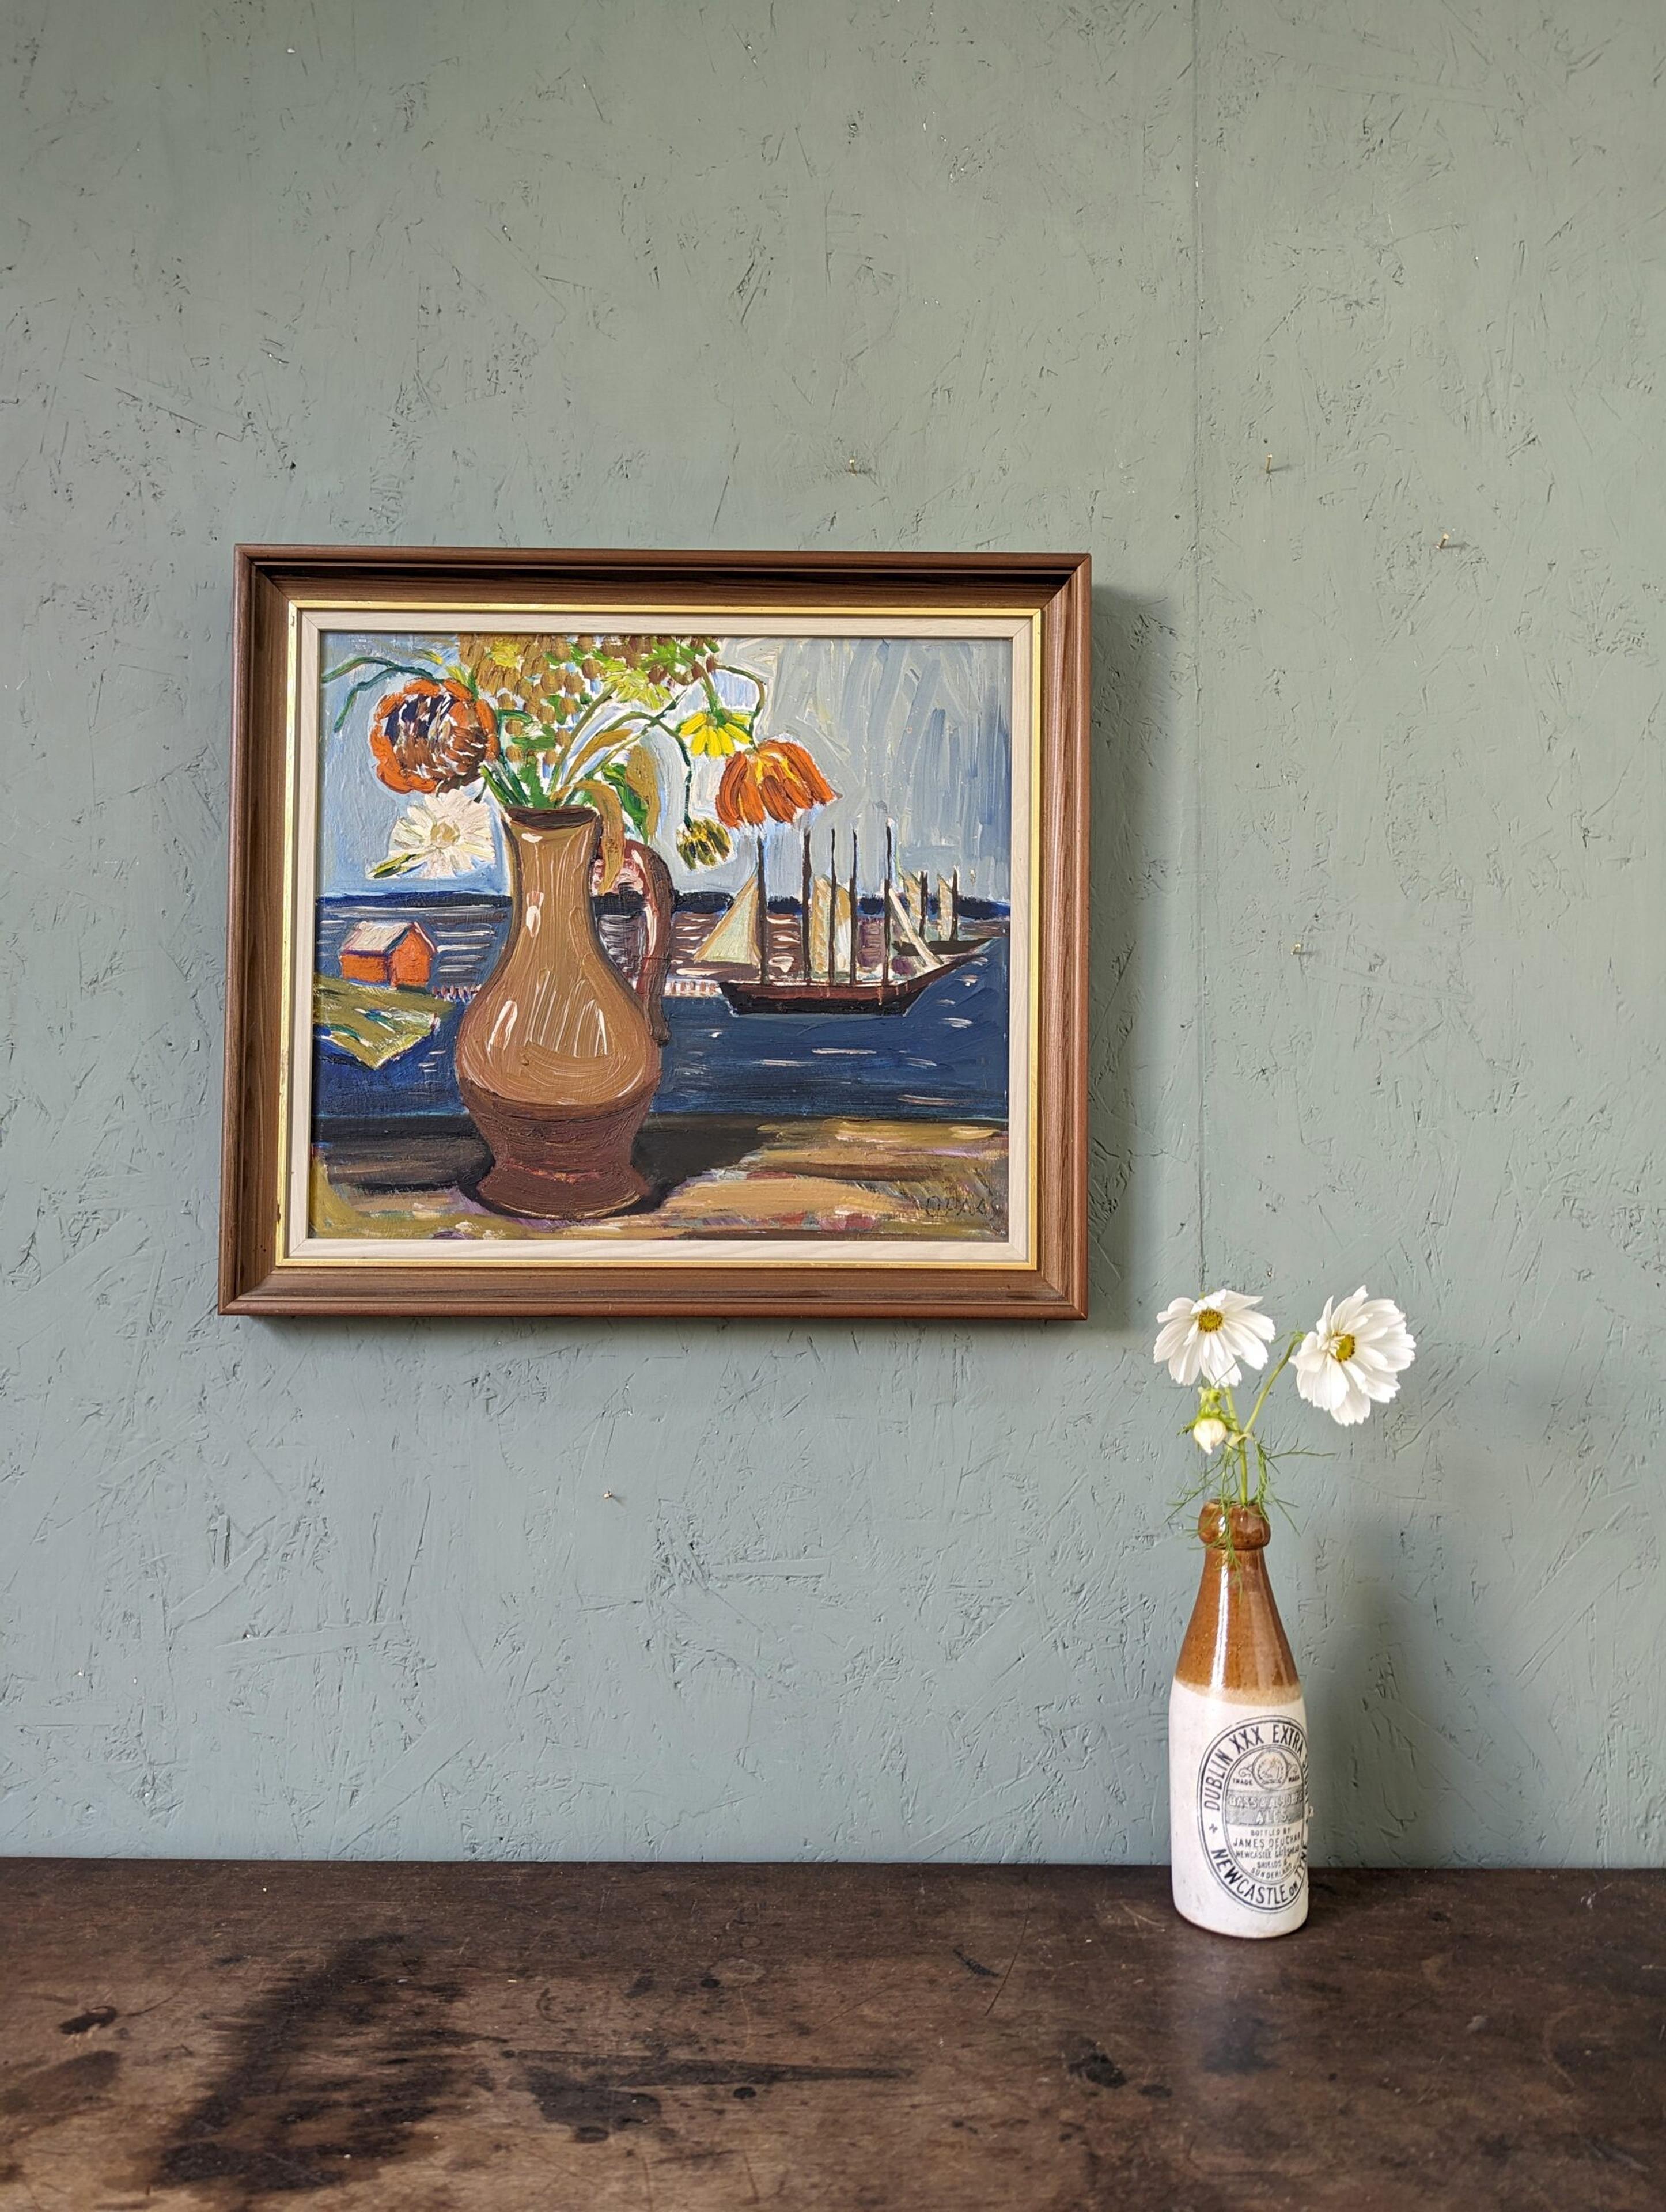 SAIL BOATS & FLOWERS
Size:  43 x 48 cm (including frame)
Oil on Board

A fantastic and confidently executed expressionist mid-century composition, painted in oil onto board.

A large brown vase filled with striking orange and yellow flowers